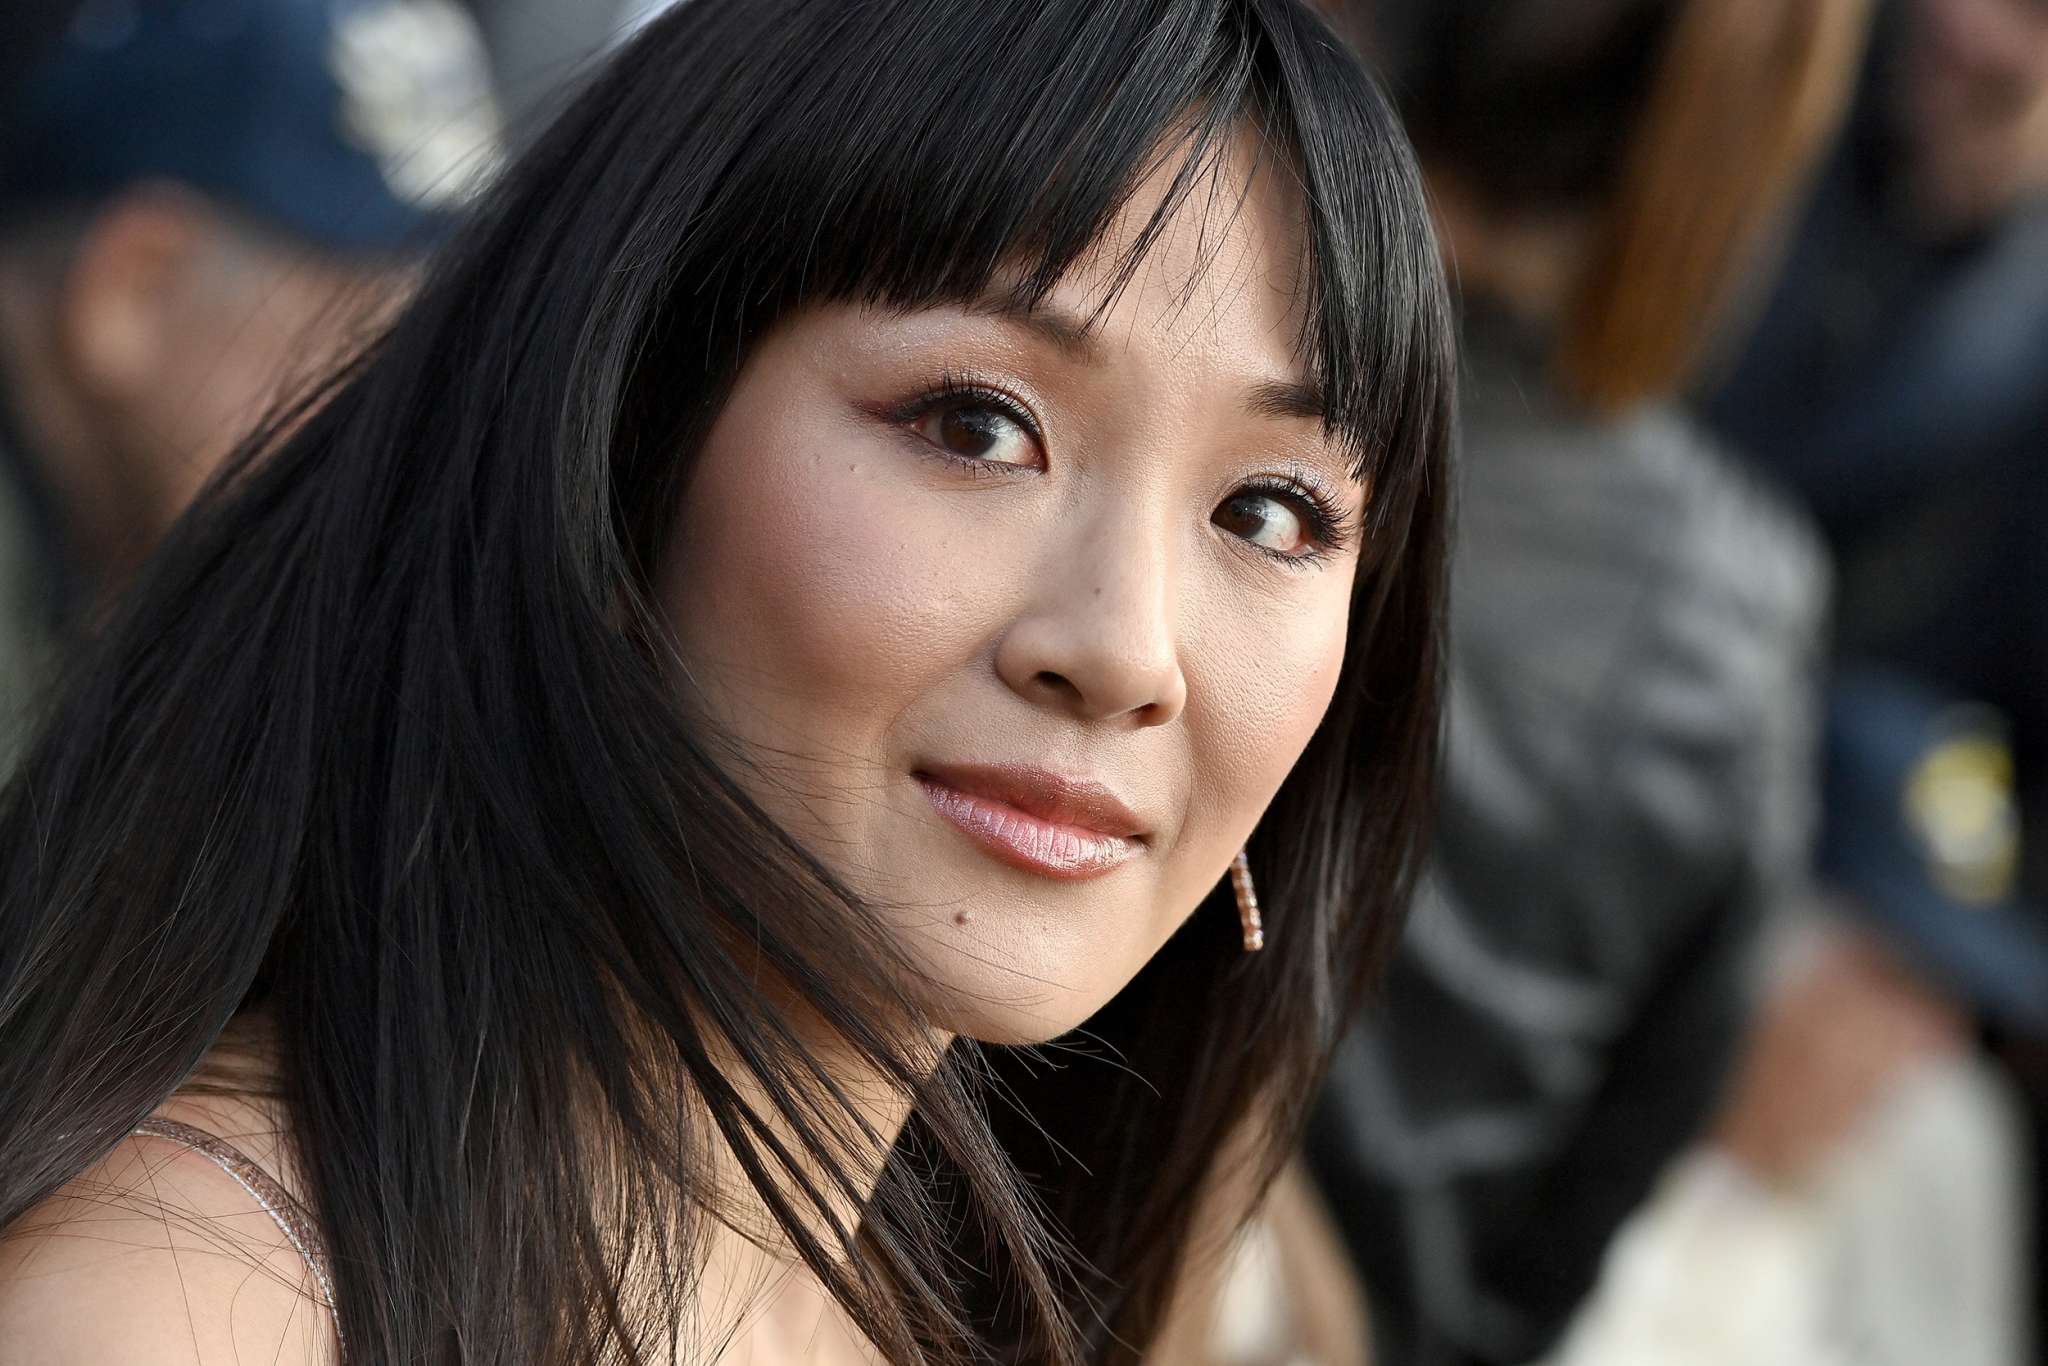 Constance Wu Talks About How Twitter Backlash Almost Made Her Suicidal